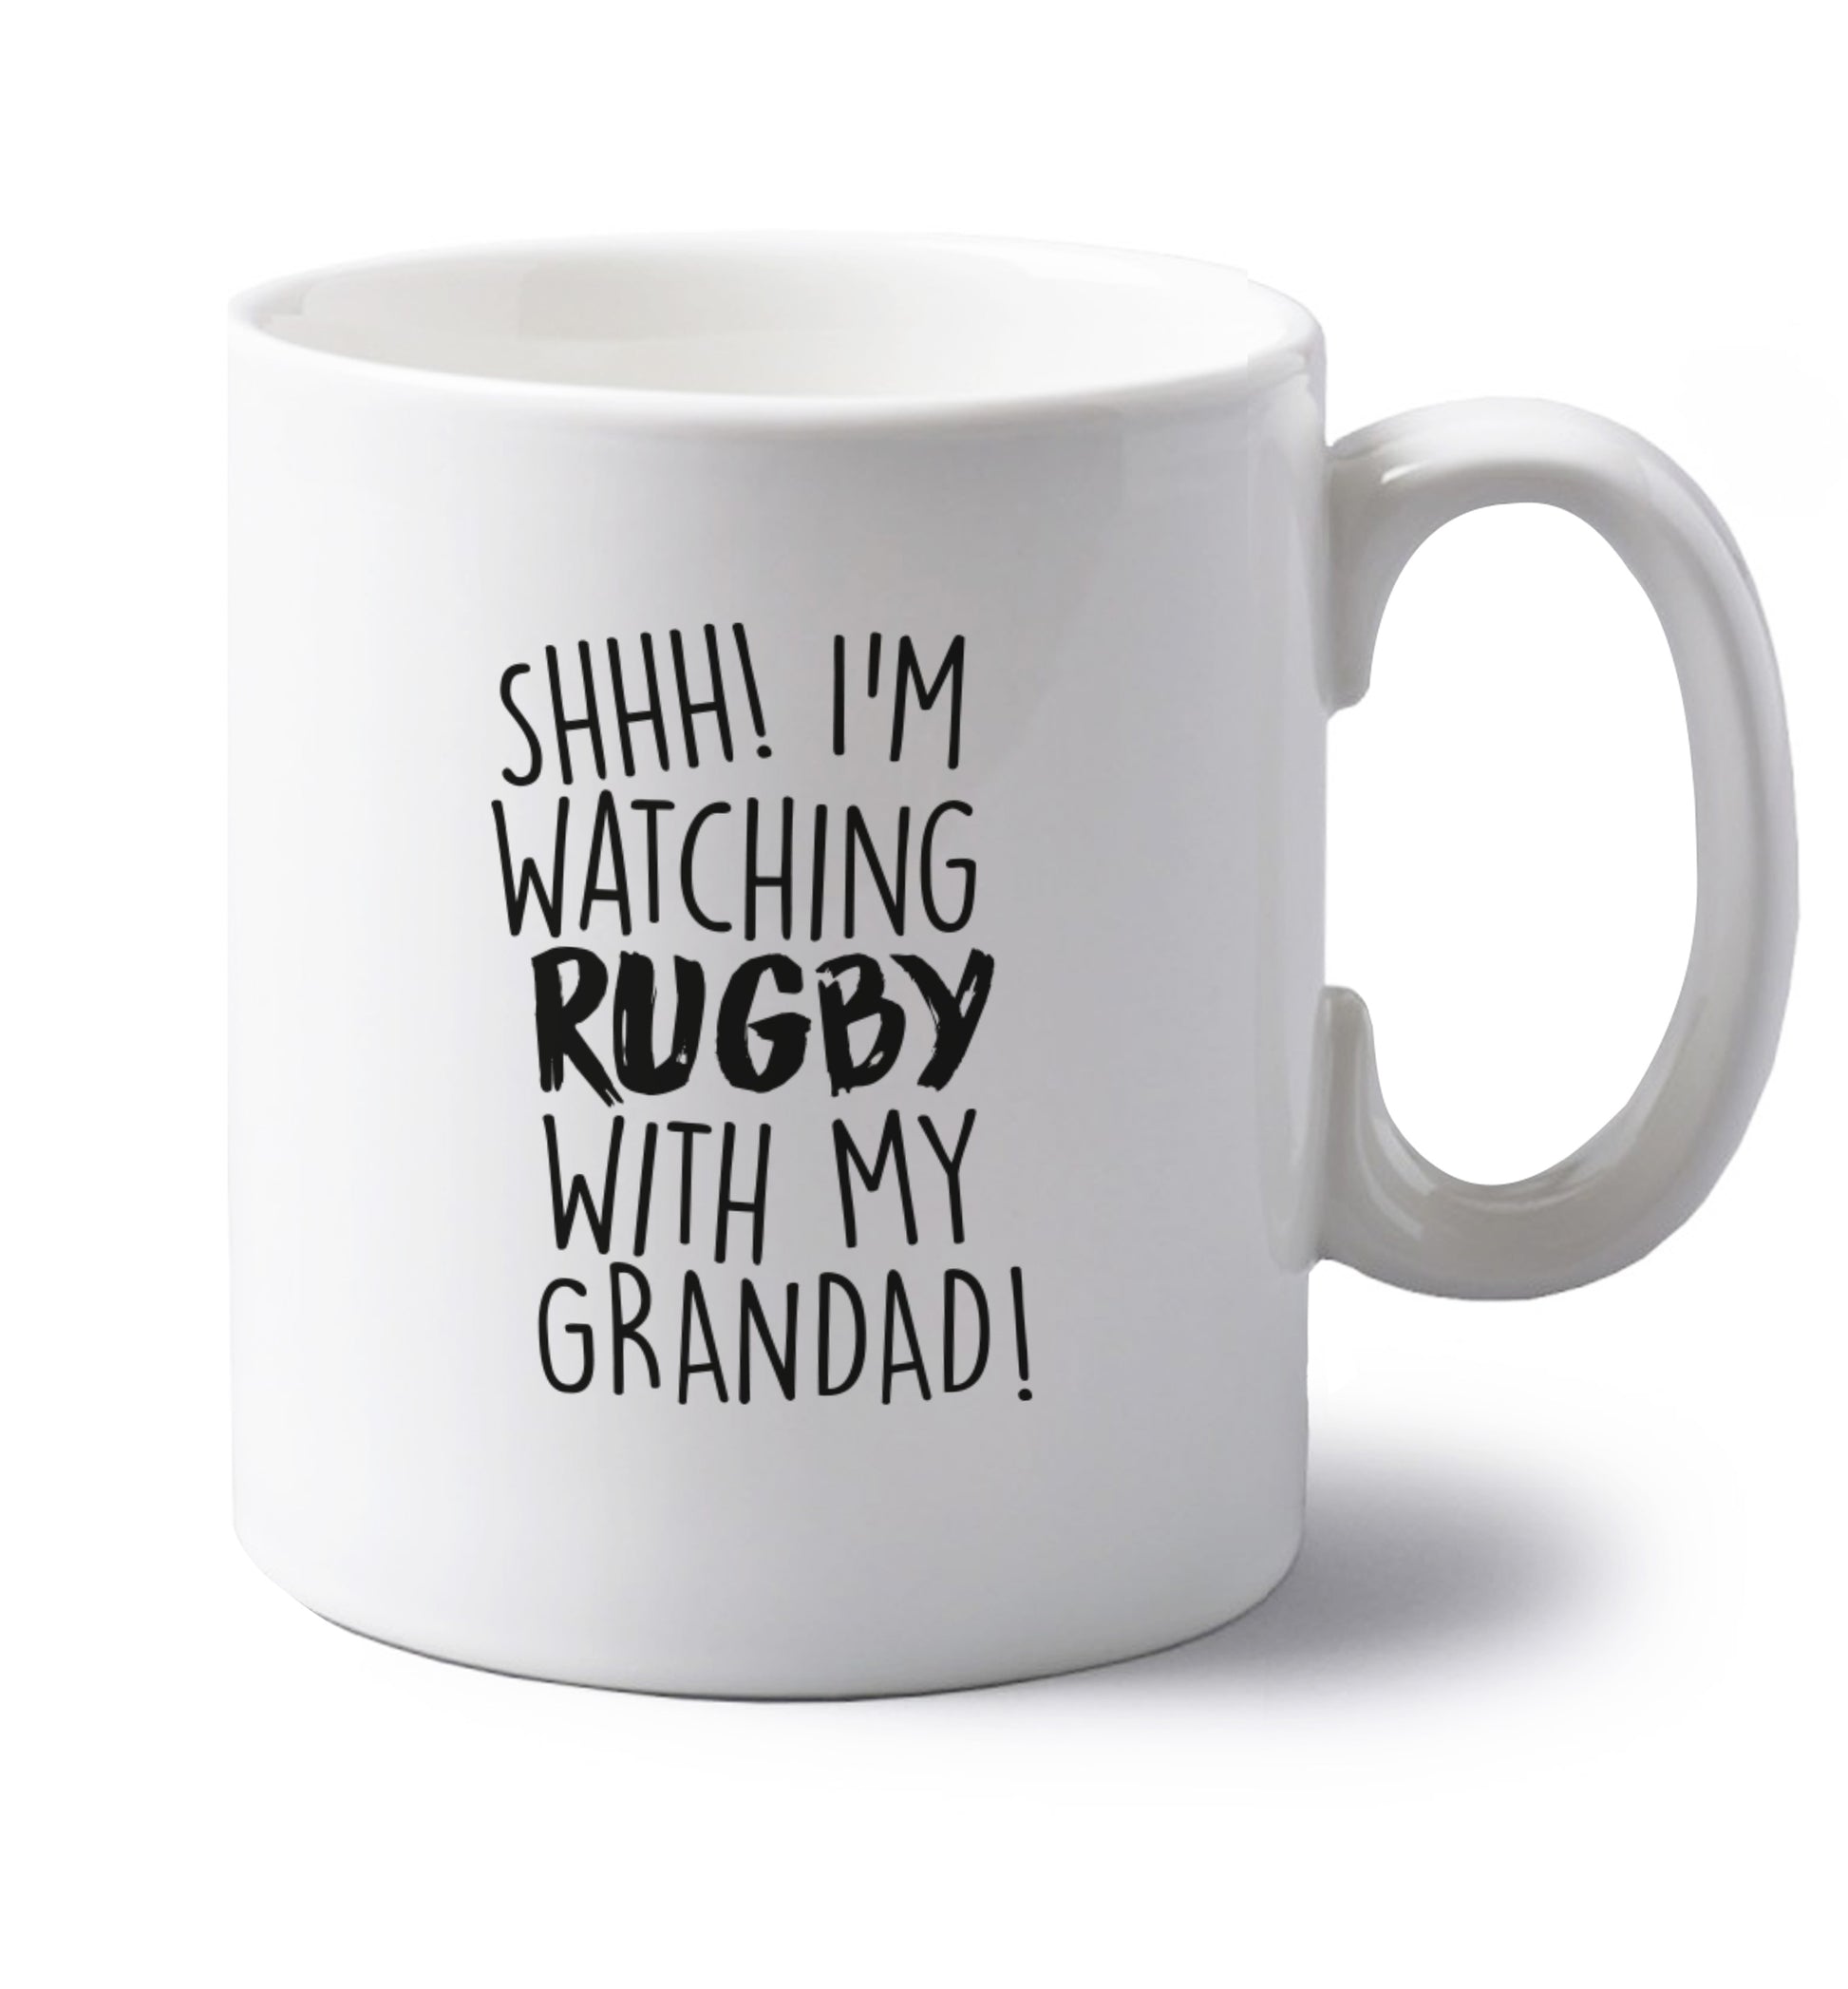 Shh I'm watching rugby with my grandad left handed white ceramic mug 